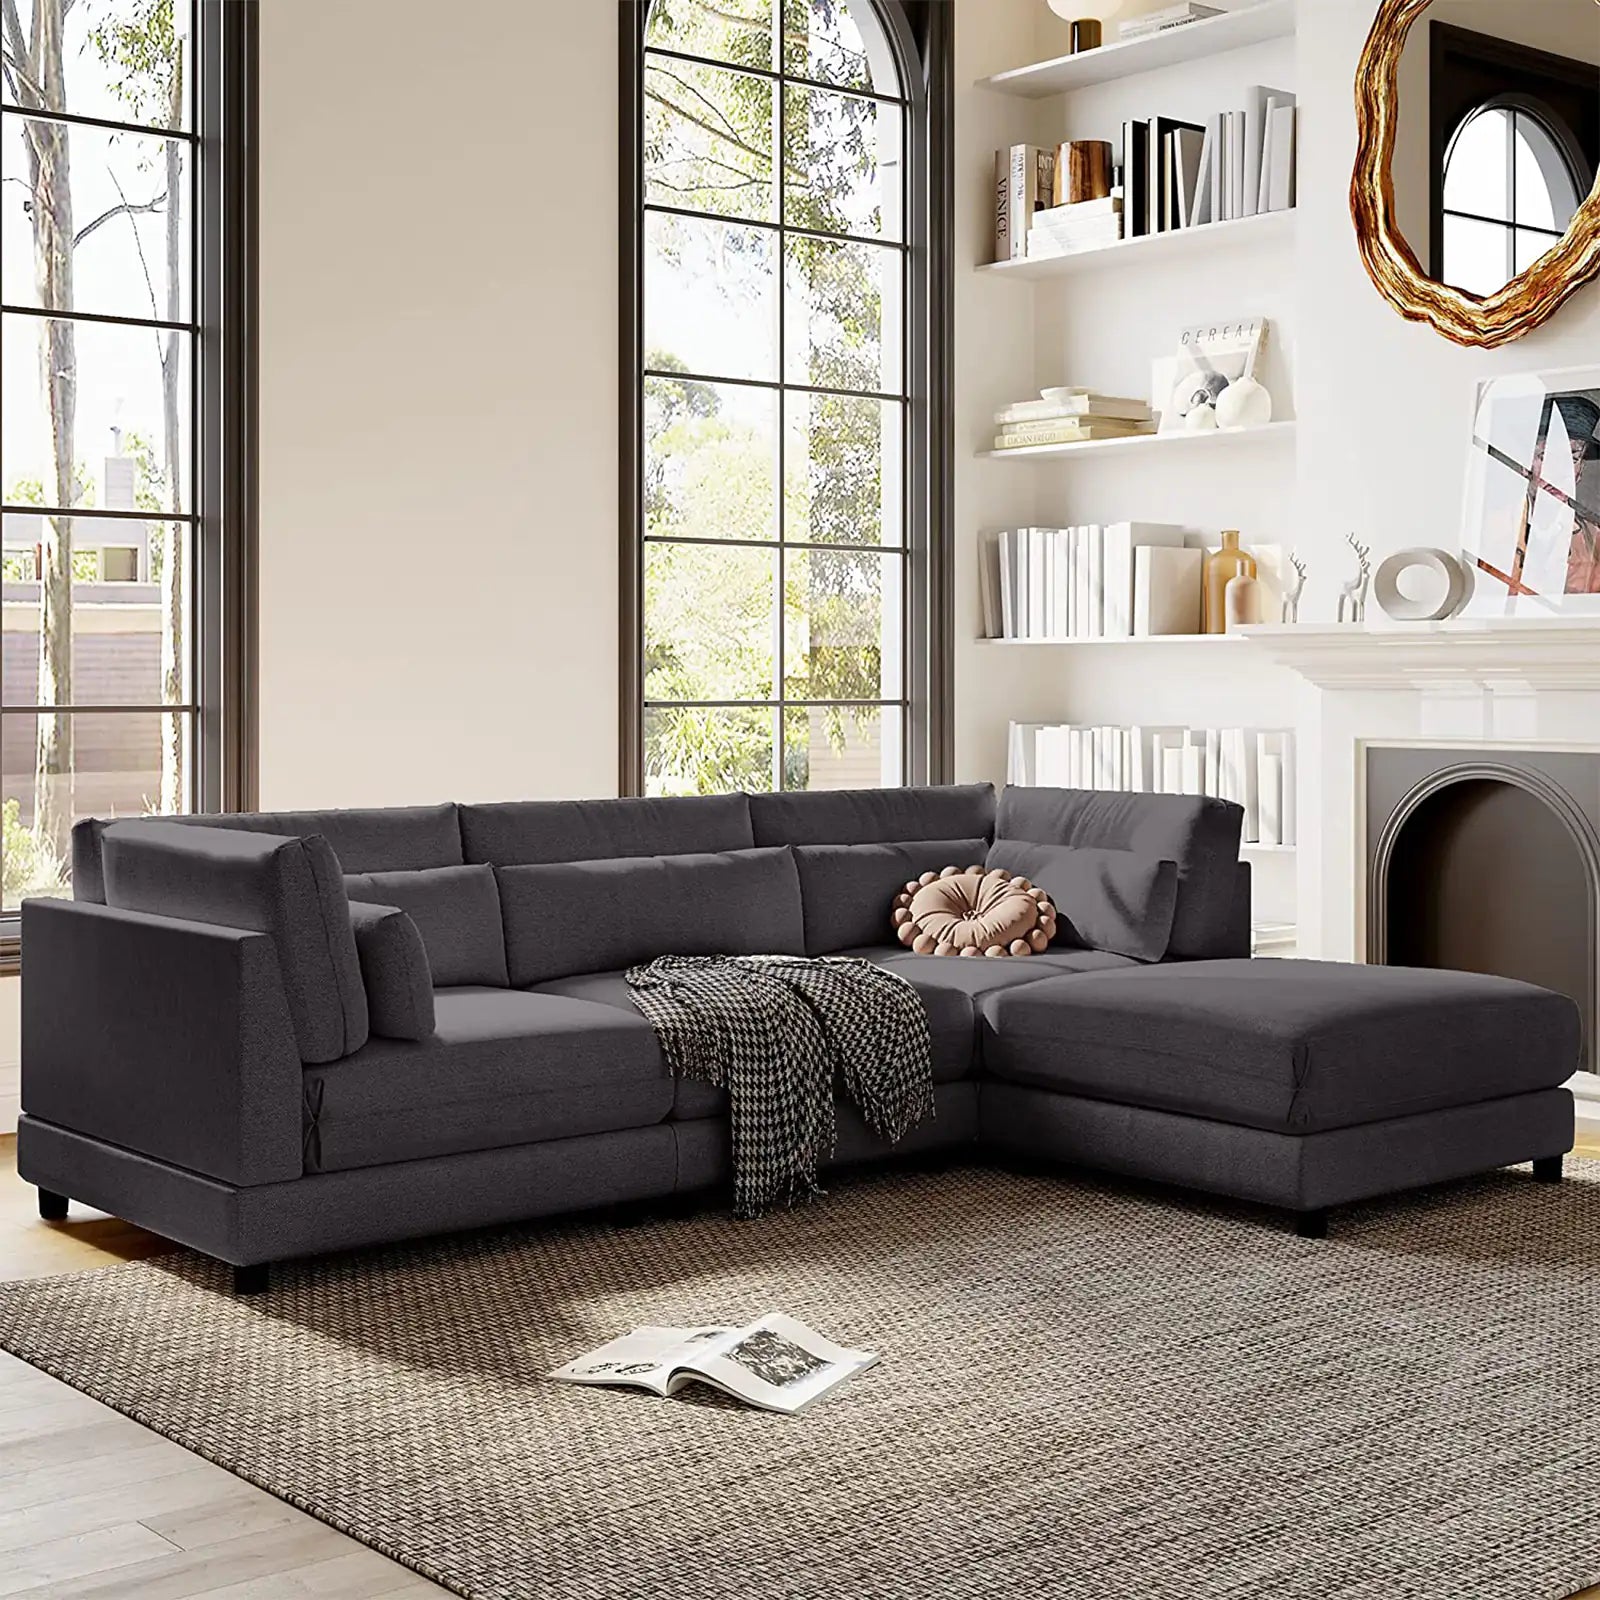 Upholstered Sectional Sofa Sets with Removable Ottomans and Waist Pillows